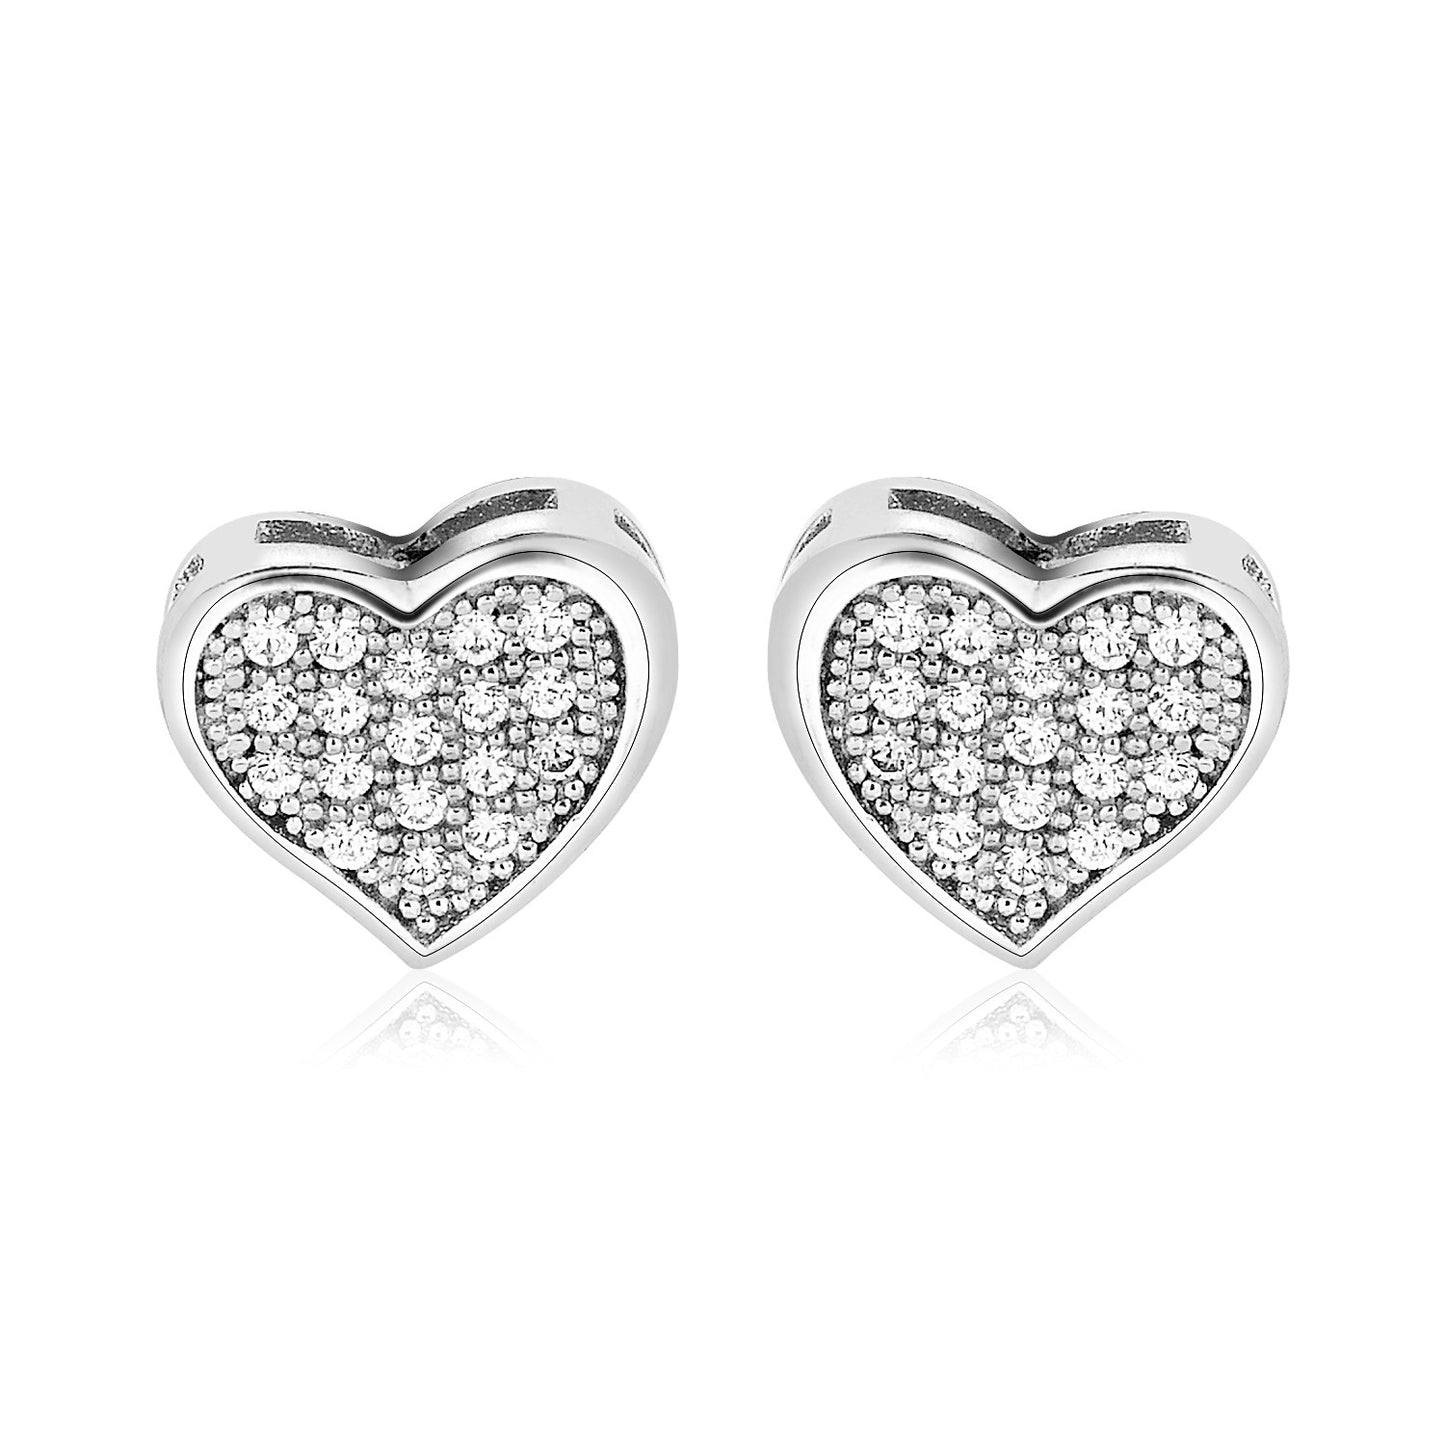 Sterling Silver Heart Earrings with Cubic Zirconias